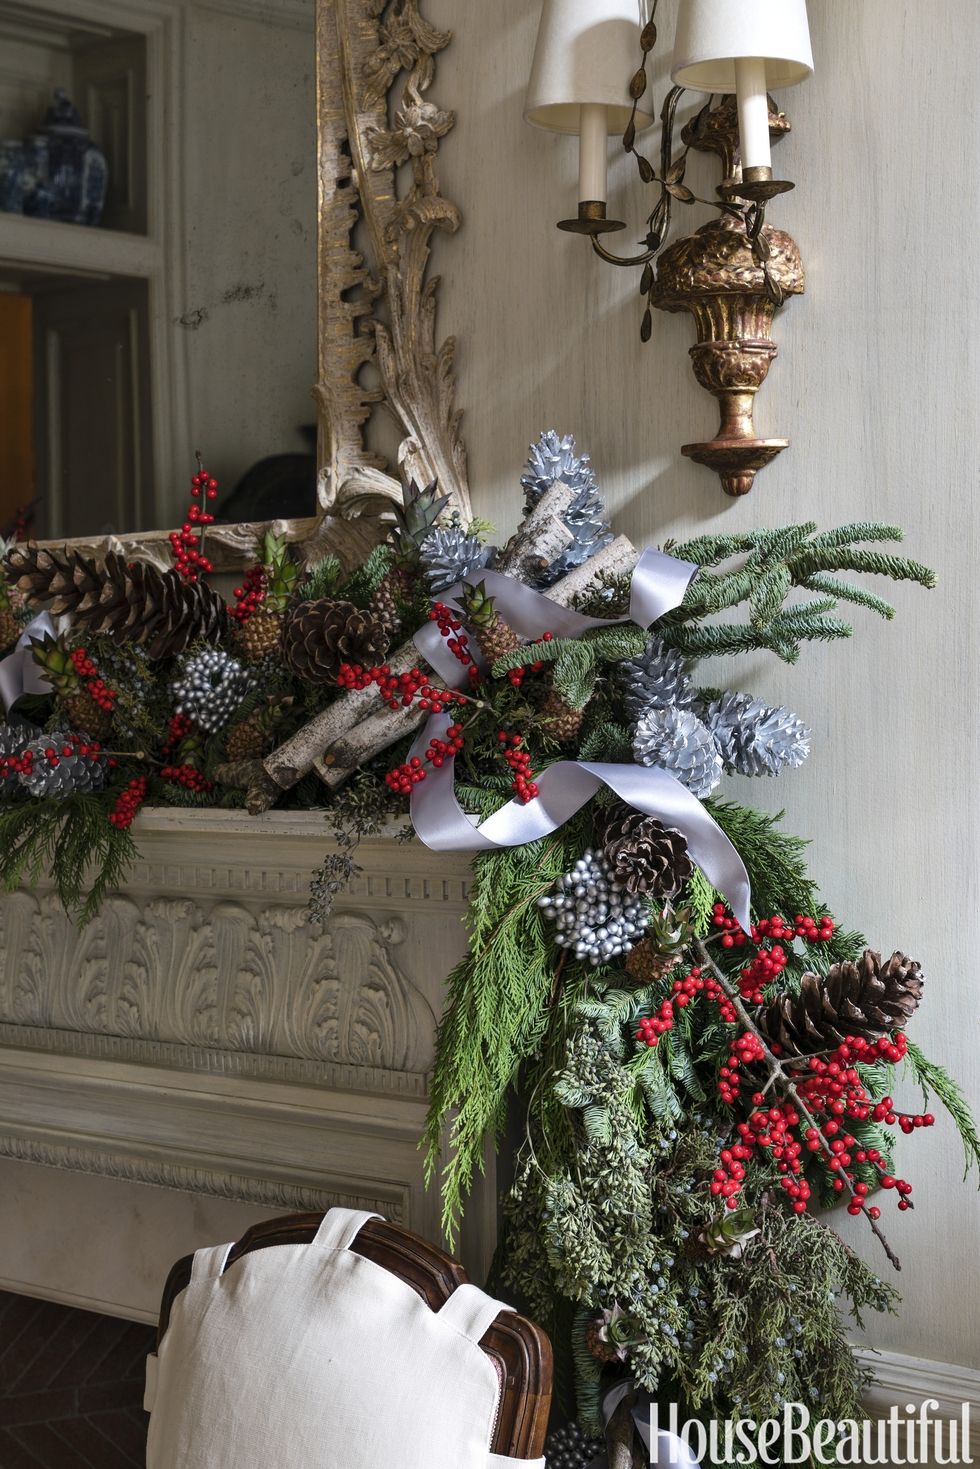 A Charlotte Moss Christmas – Weekly Design Inspiration